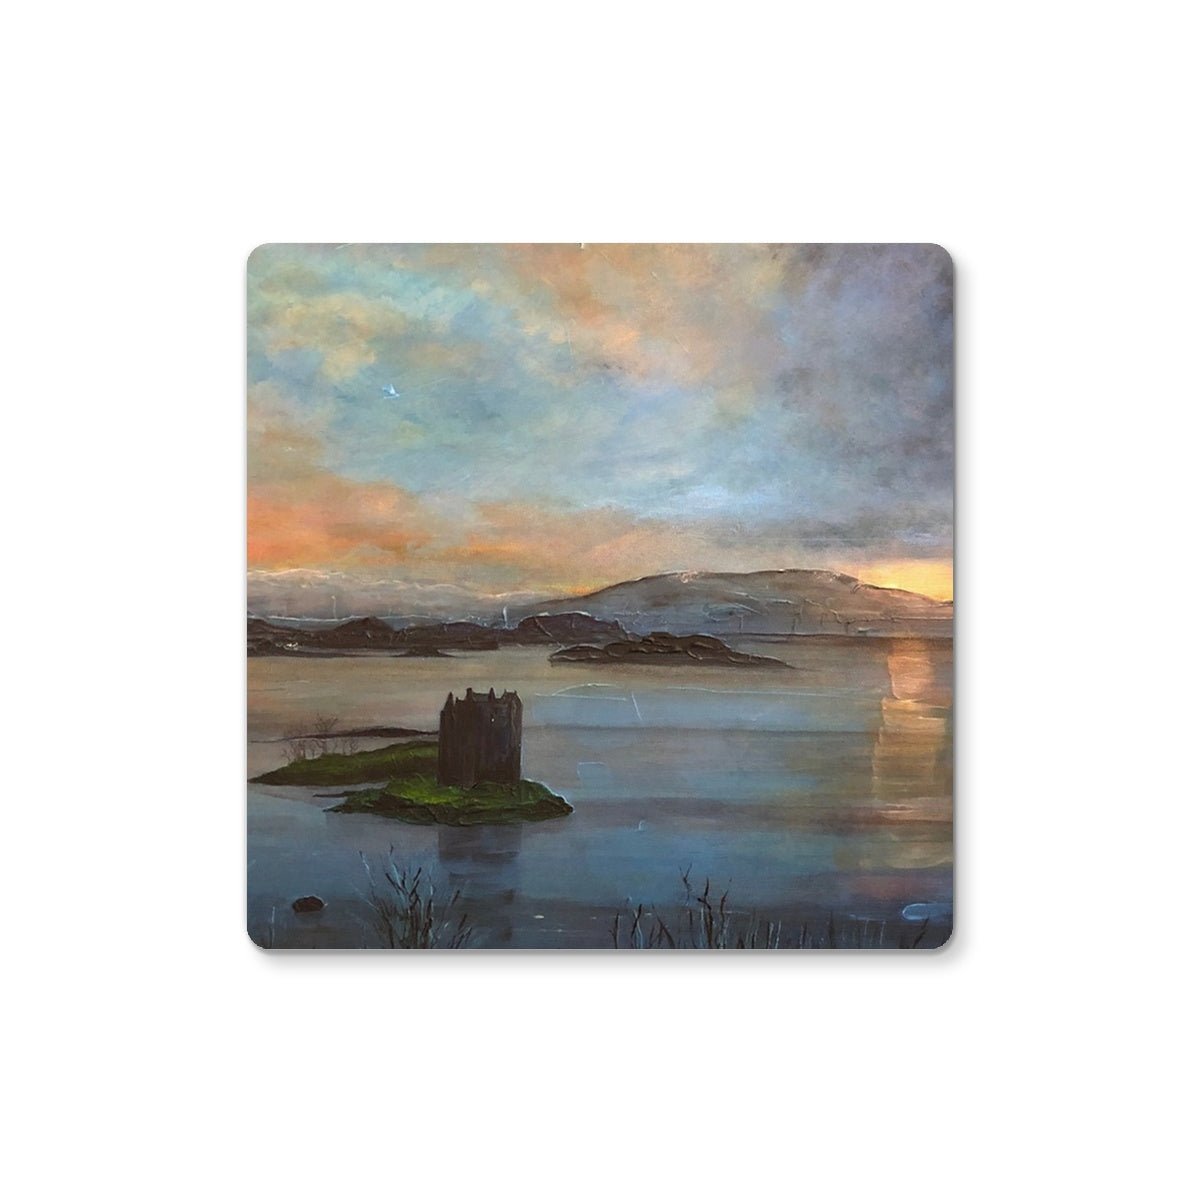 Castle Stalker Twilight Art Gift Coaster-Coasters-Historic & Iconic Scotland Art Gallery-2 Coasters-Paintings, Prints, Homeware, Art Gifts From Scotland By Scottish Artist Kevin Hunter